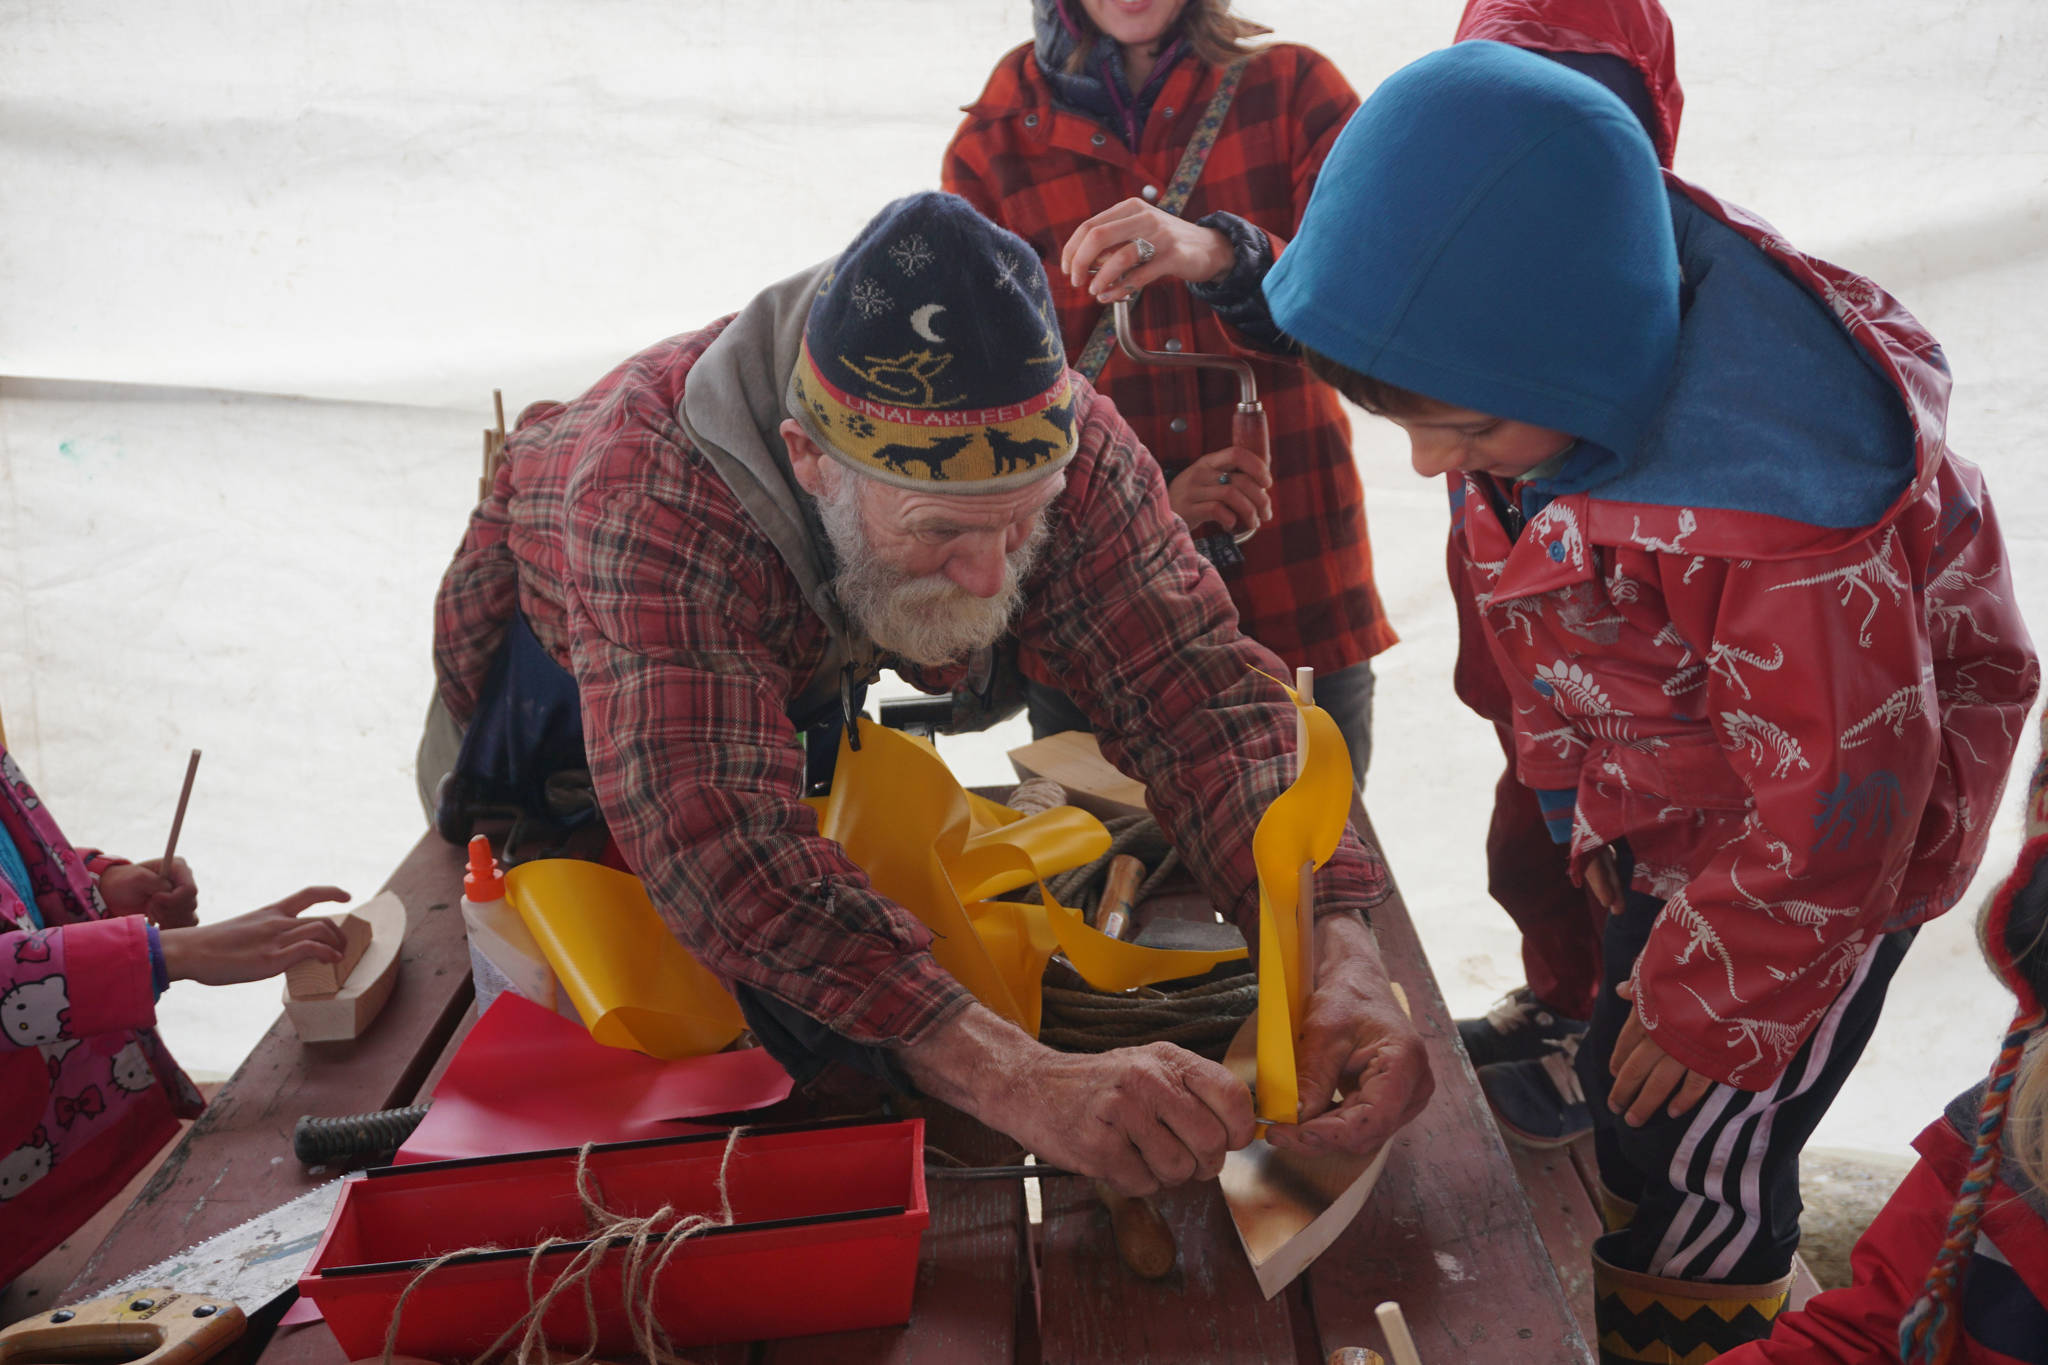 John Miles, left, helps Ike Mitchell work on a boat during the Kachemak Bay Wooden Boat Society Festival on Saturday, Sept. 2, 2017 at the Nick Dudiak Fishing Lagoon campground in Homer, Alaska. Ike’s mother, Jamey Cloud, and his brother, Charlie Mitchell, watch. (Photo by Michael Armstrong, Homer News)